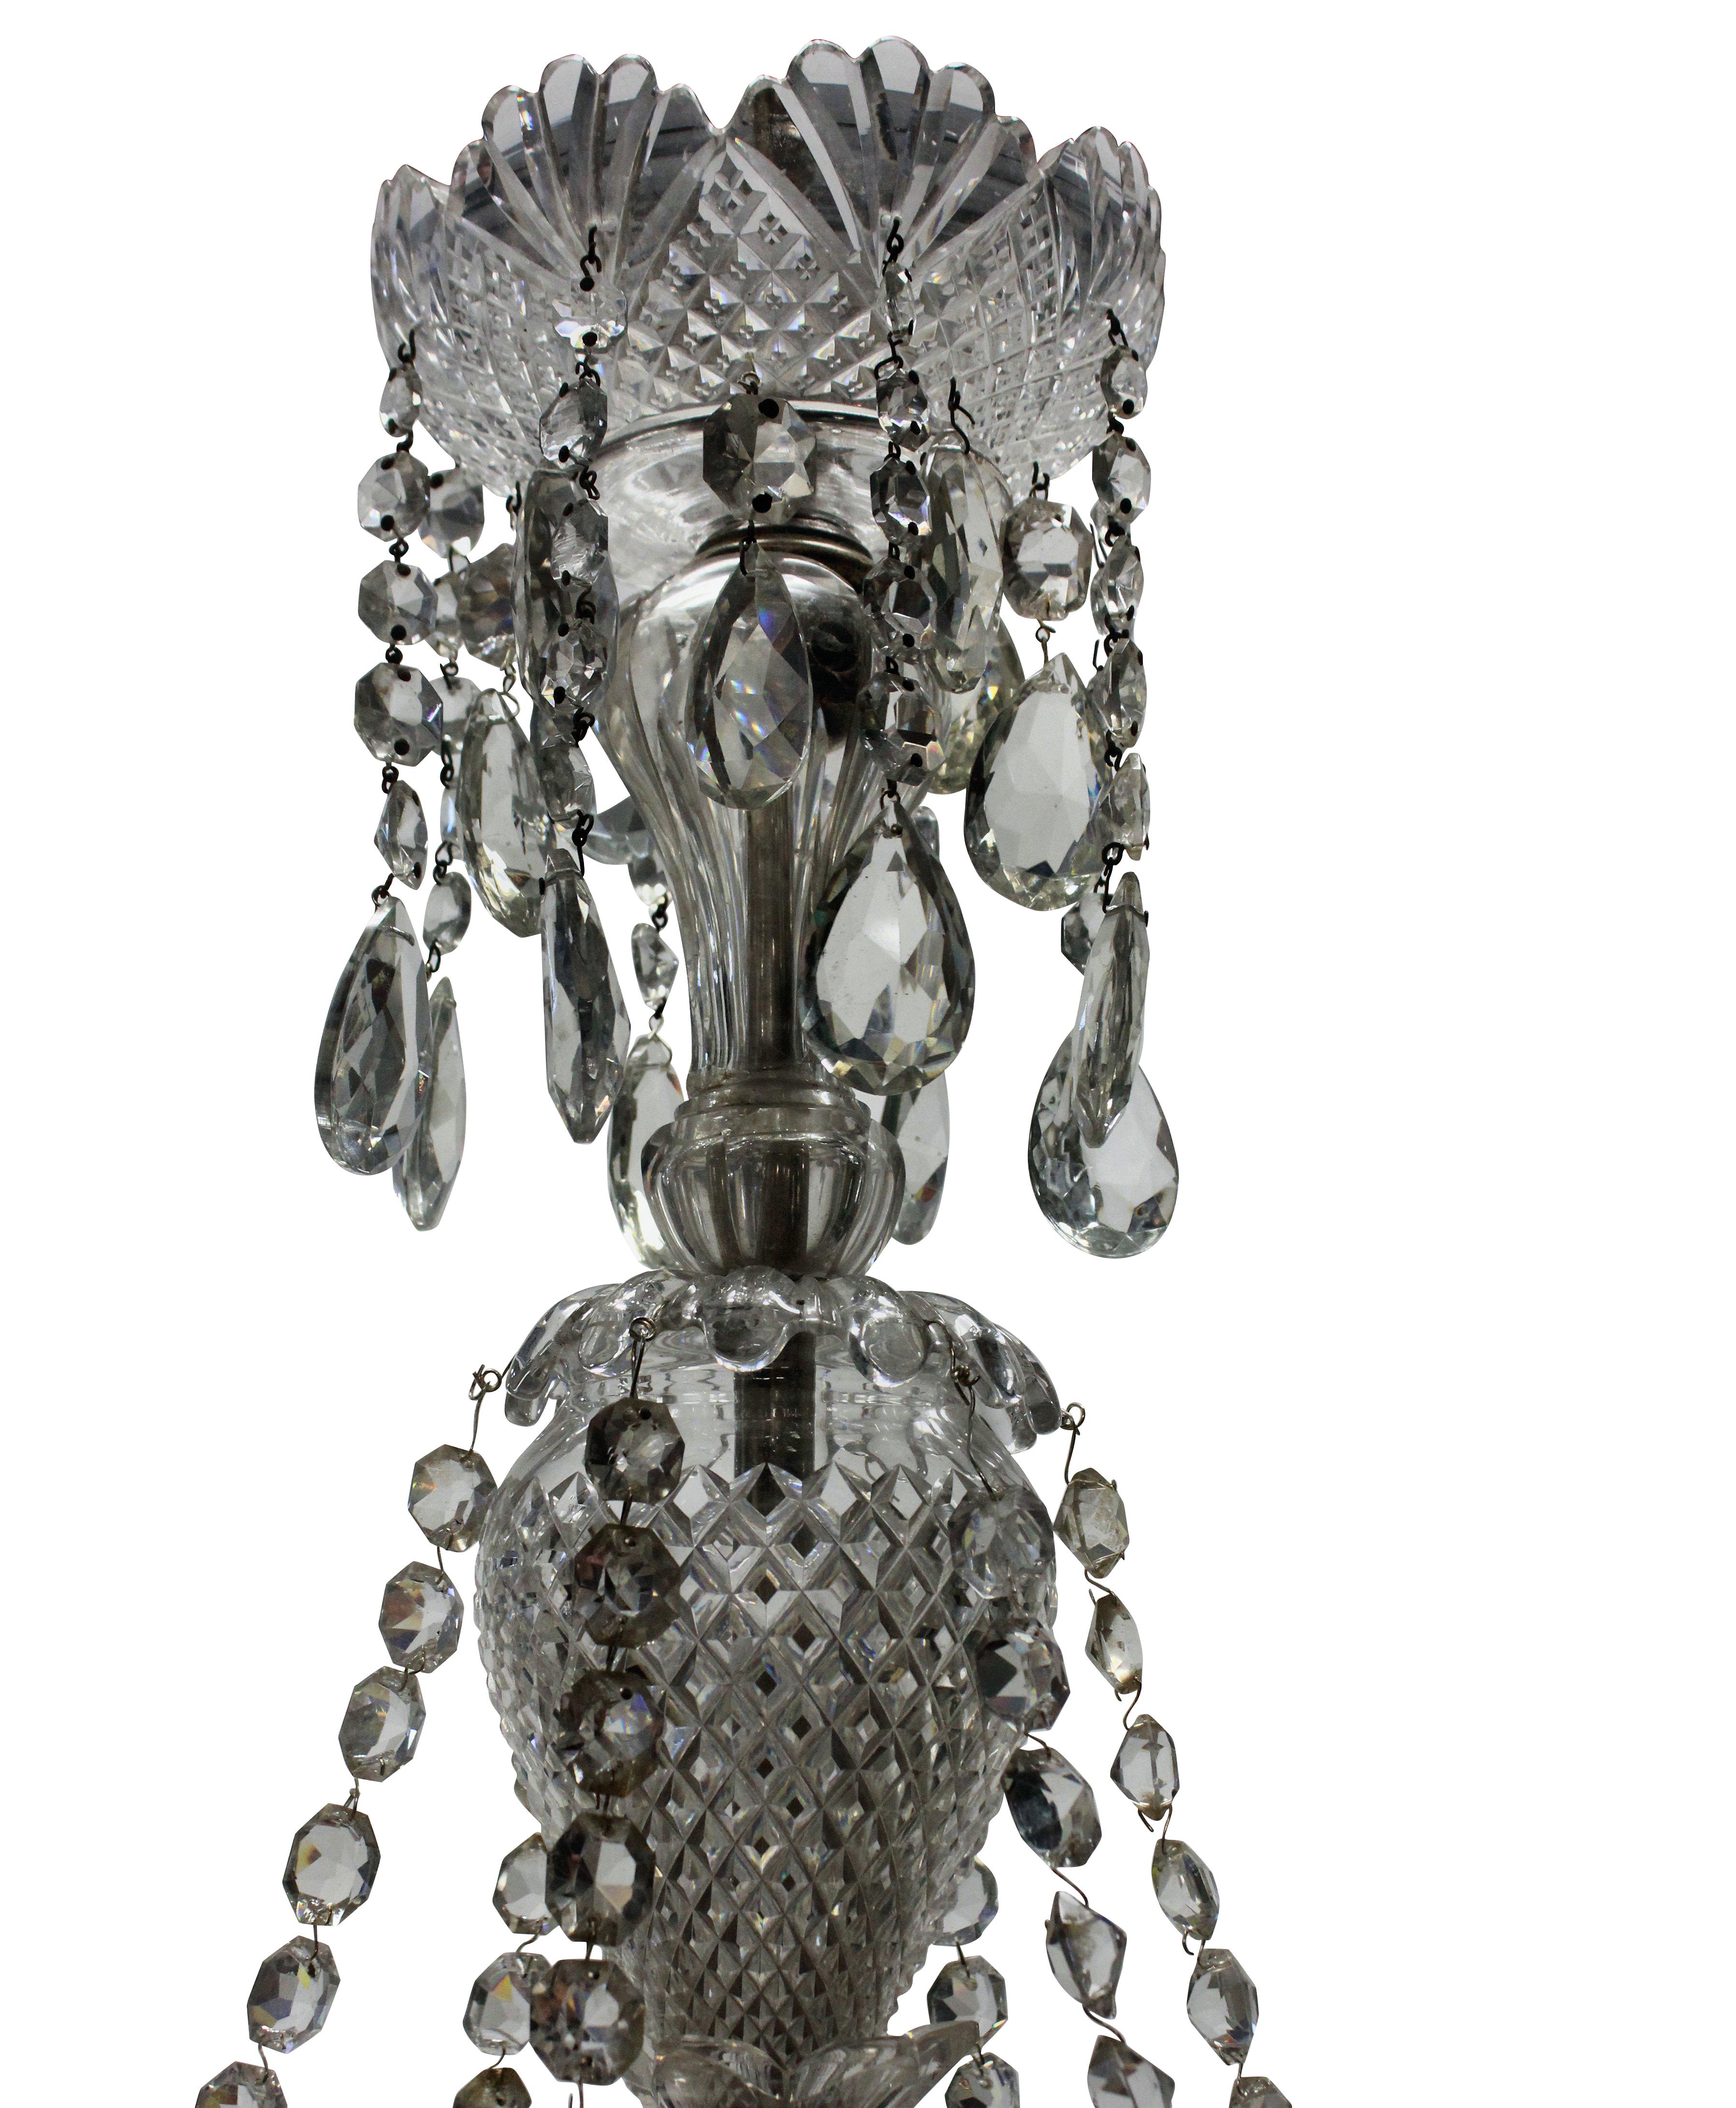 small french chandelier